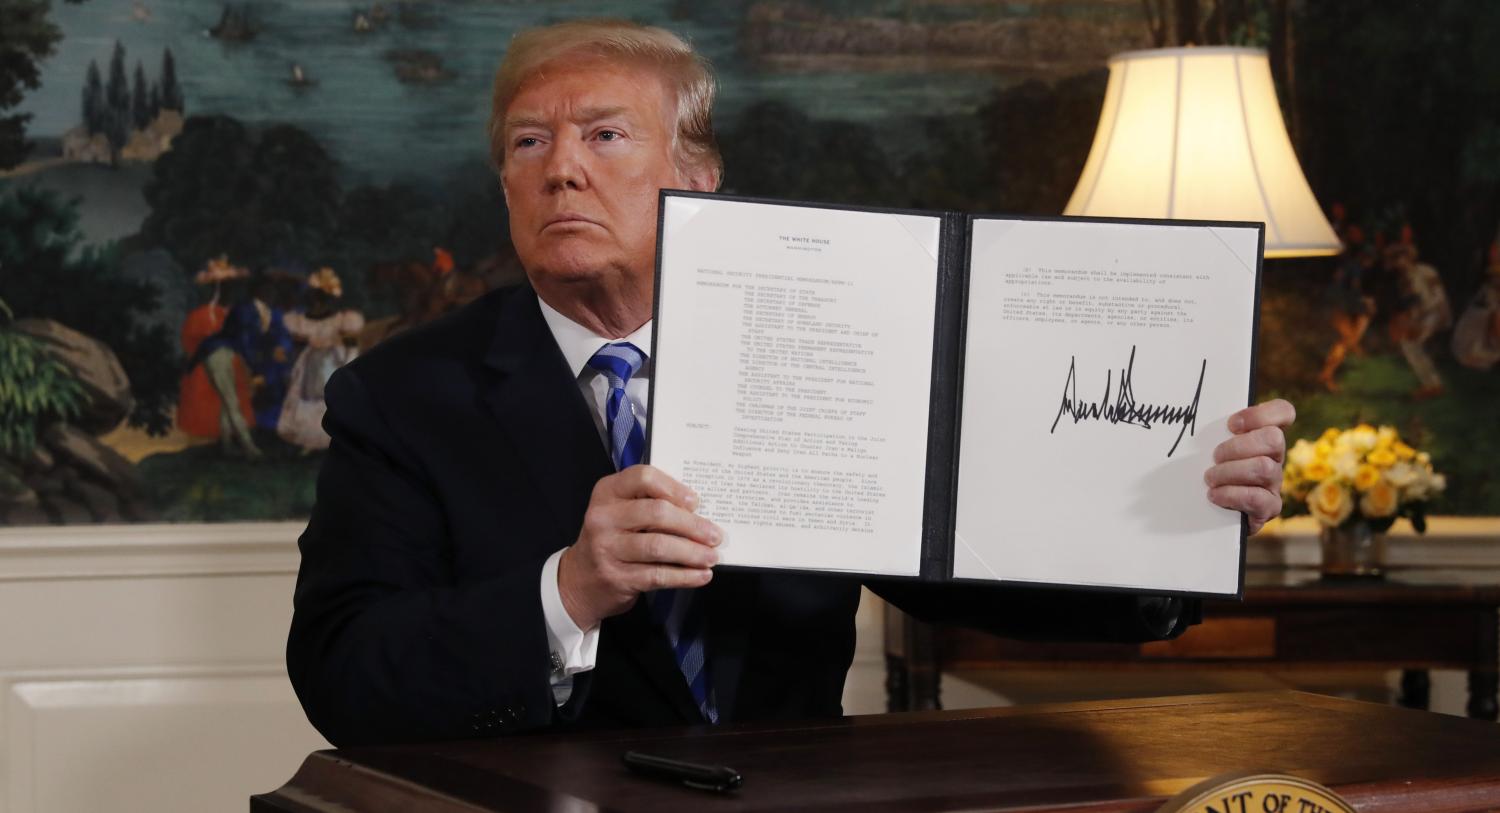 U.S. President Donald Trump displays a presidential memorandum after announcing his intent to withdraw from the JCPOA Iran nuclear agreement in the Diplomatic Room at the White House in Washington, U.S., May 8, 2018. REUTERS/Jonathan Ernst - HP1EE581FULTV